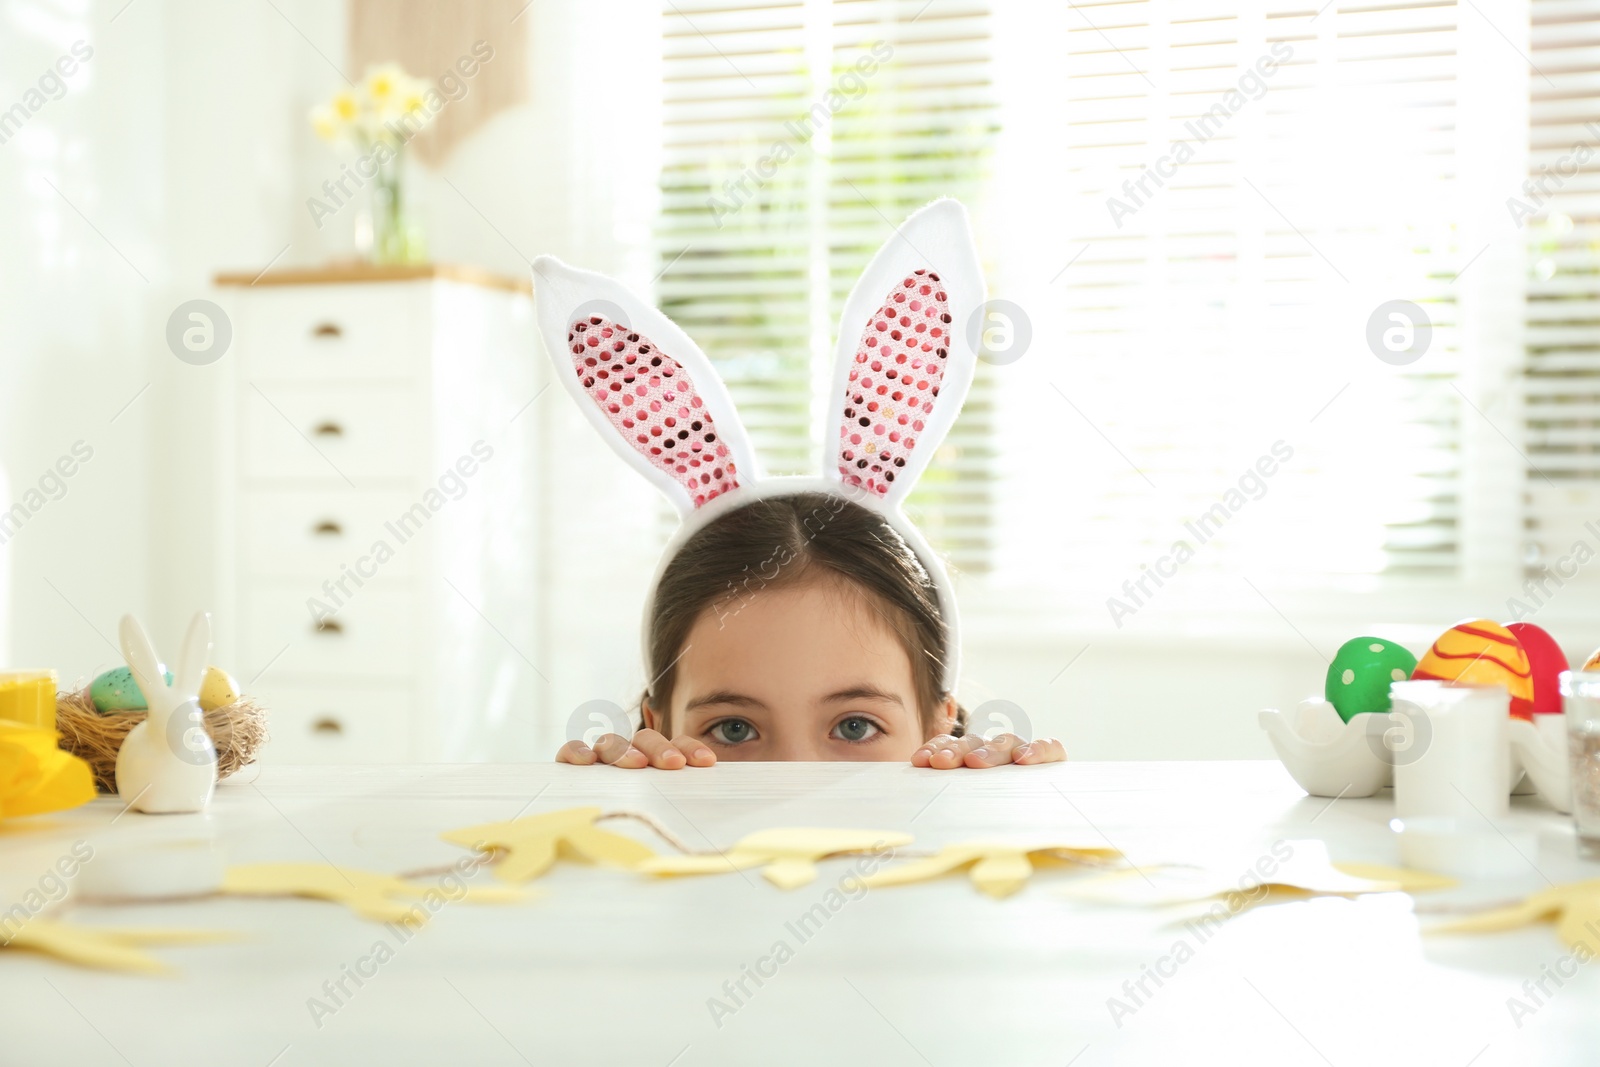 Photo of Cute little girl wearing bunny ears headband at table with Easter eggs, indoors